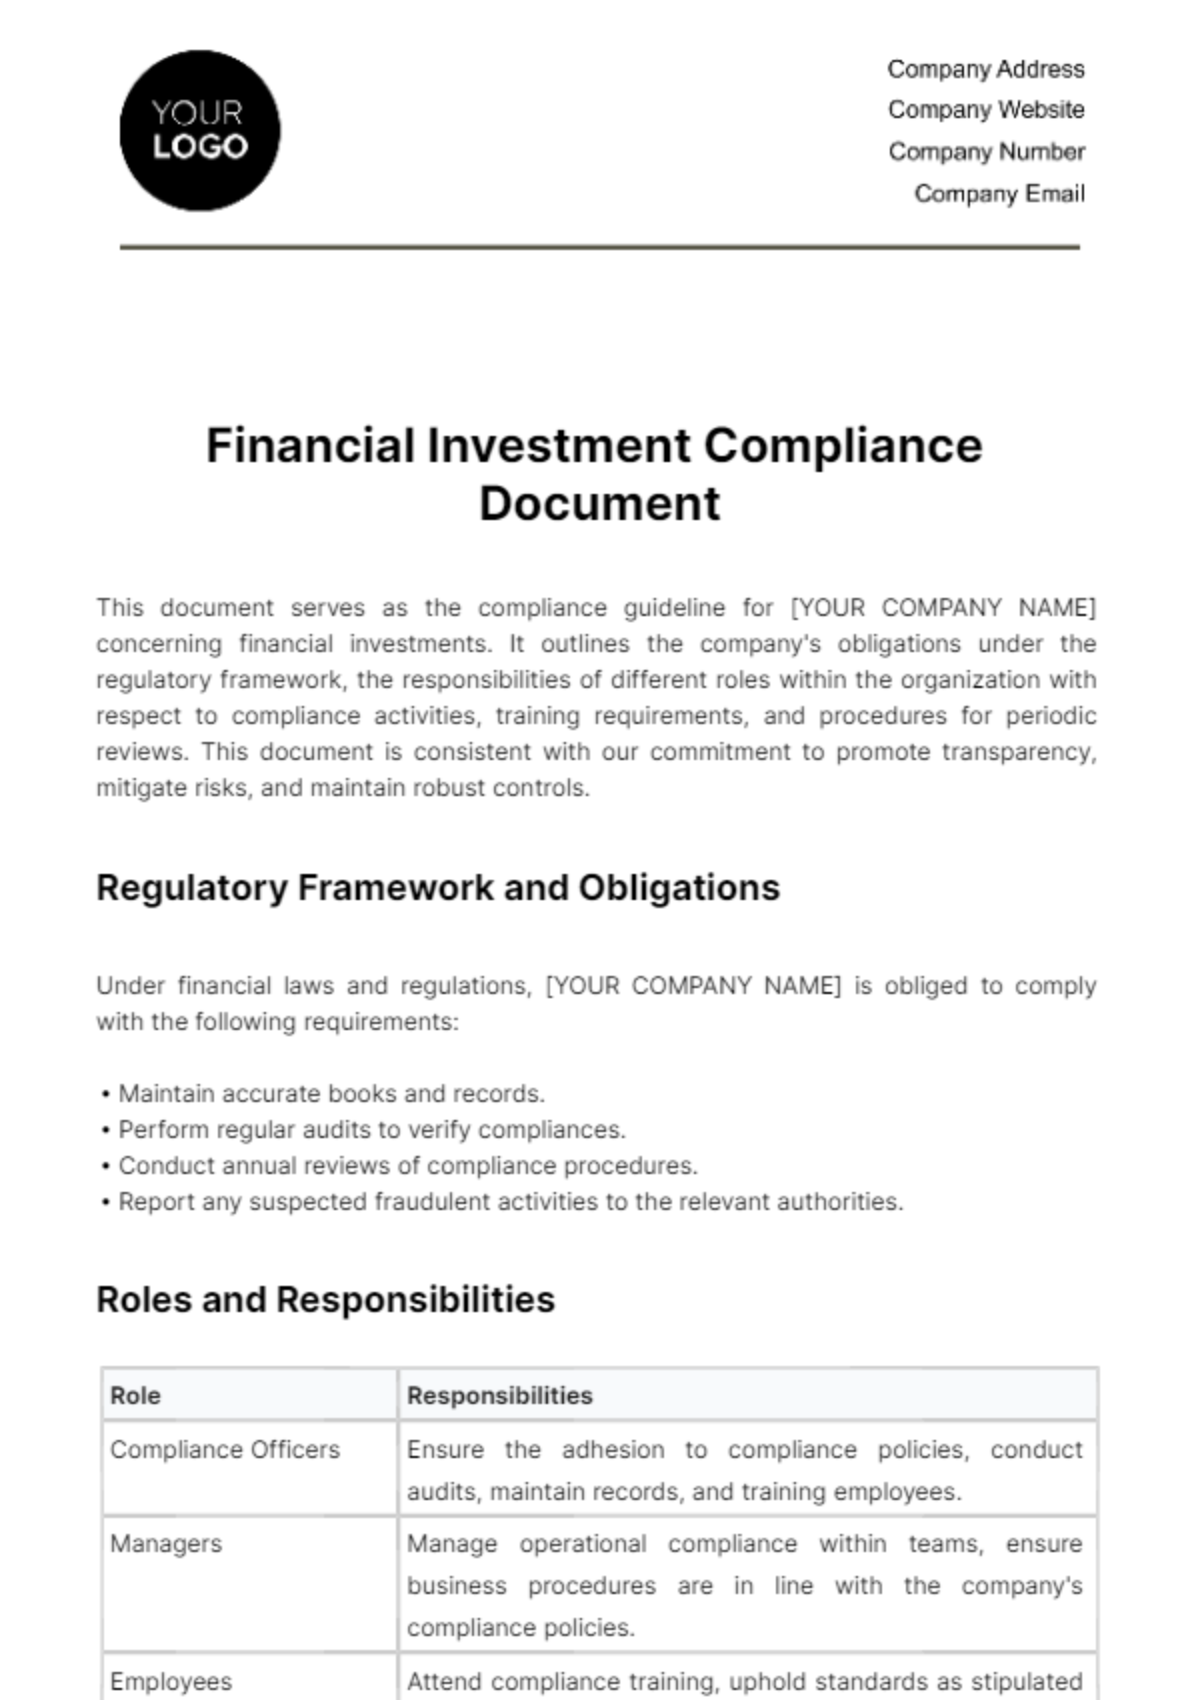 Financial Investment Compliance Document Template